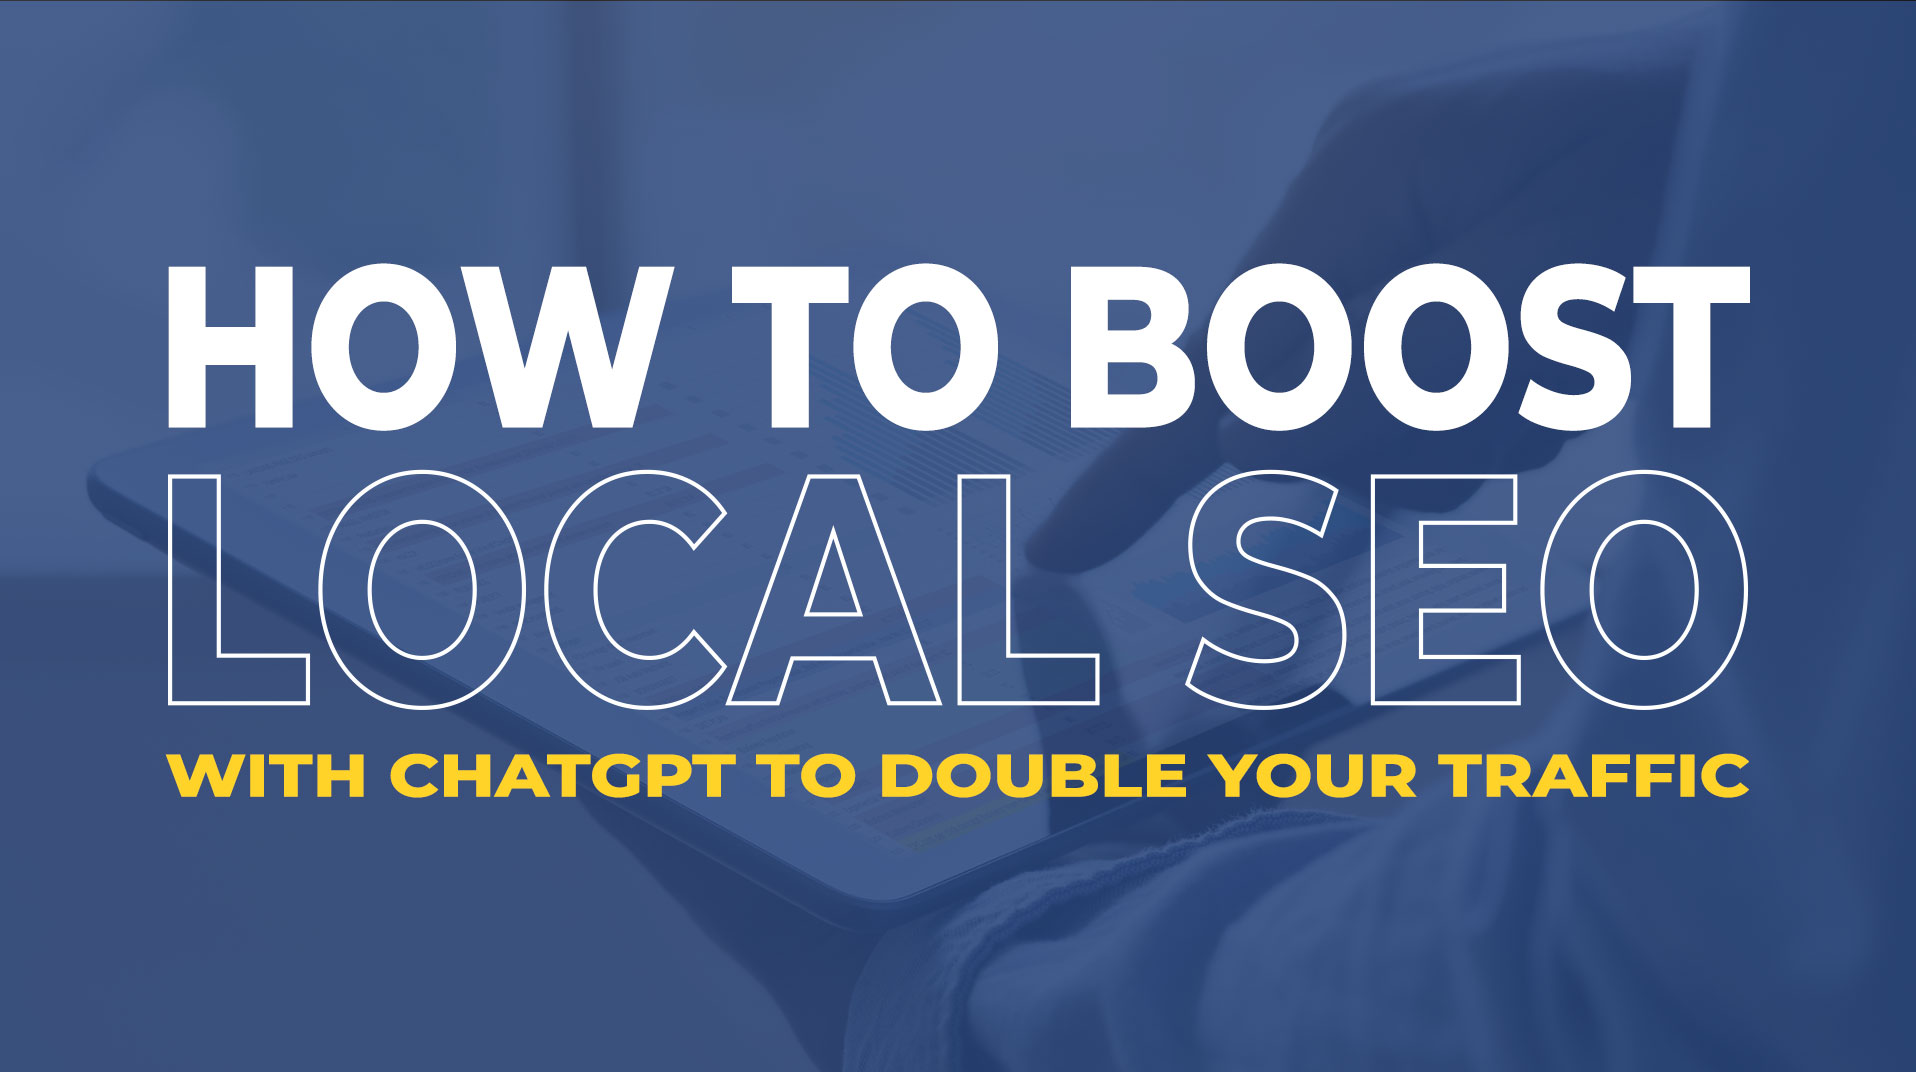 How to Boost Local SEO by 127% with ChatGPT